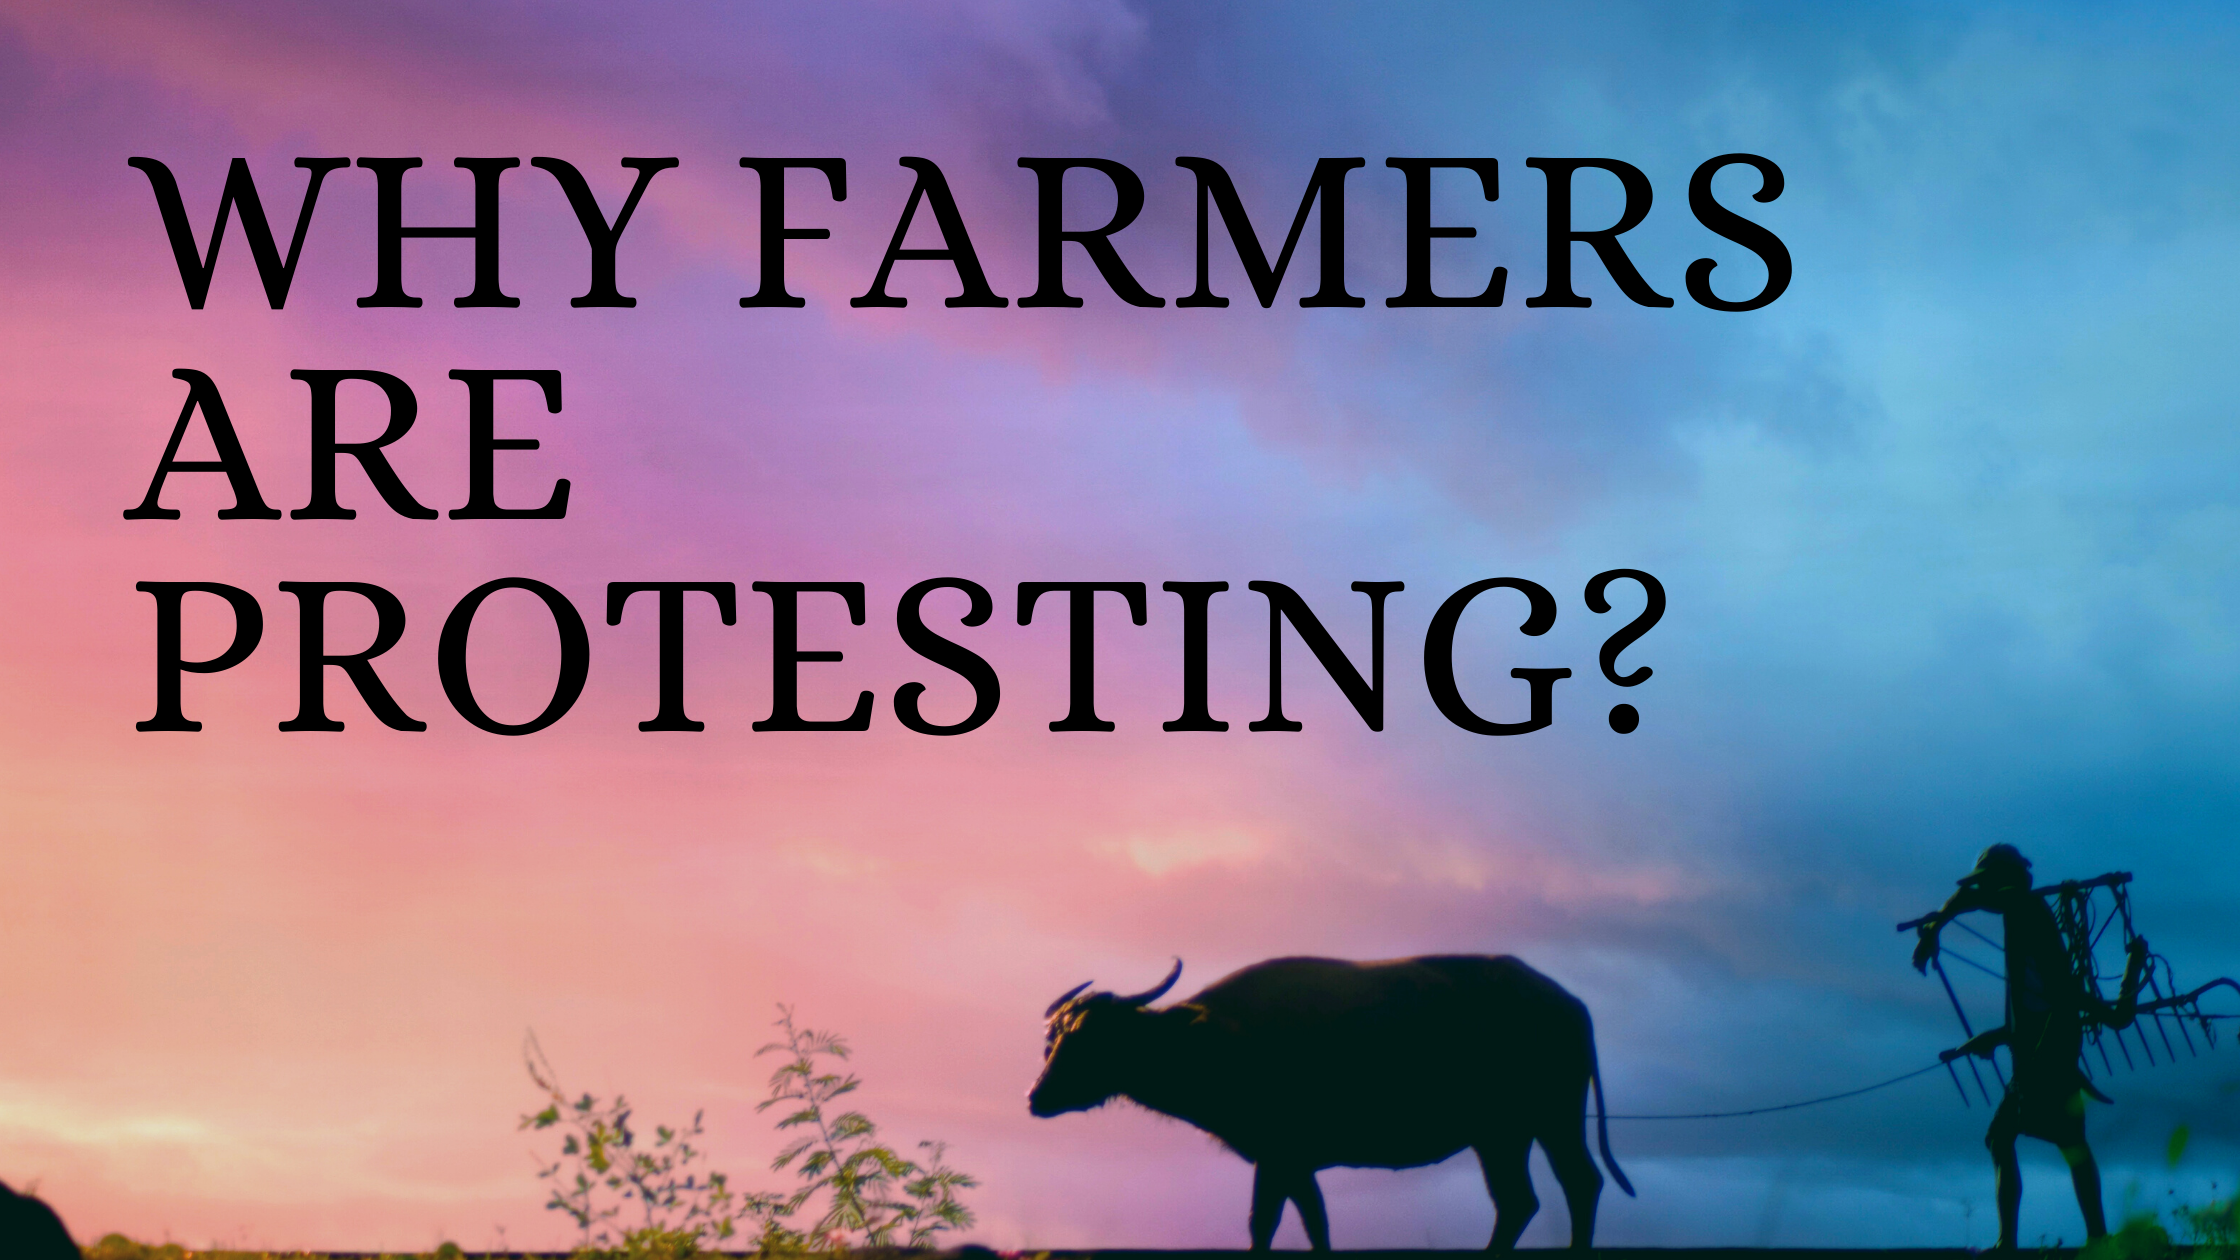 Why Farmers are Protesting?